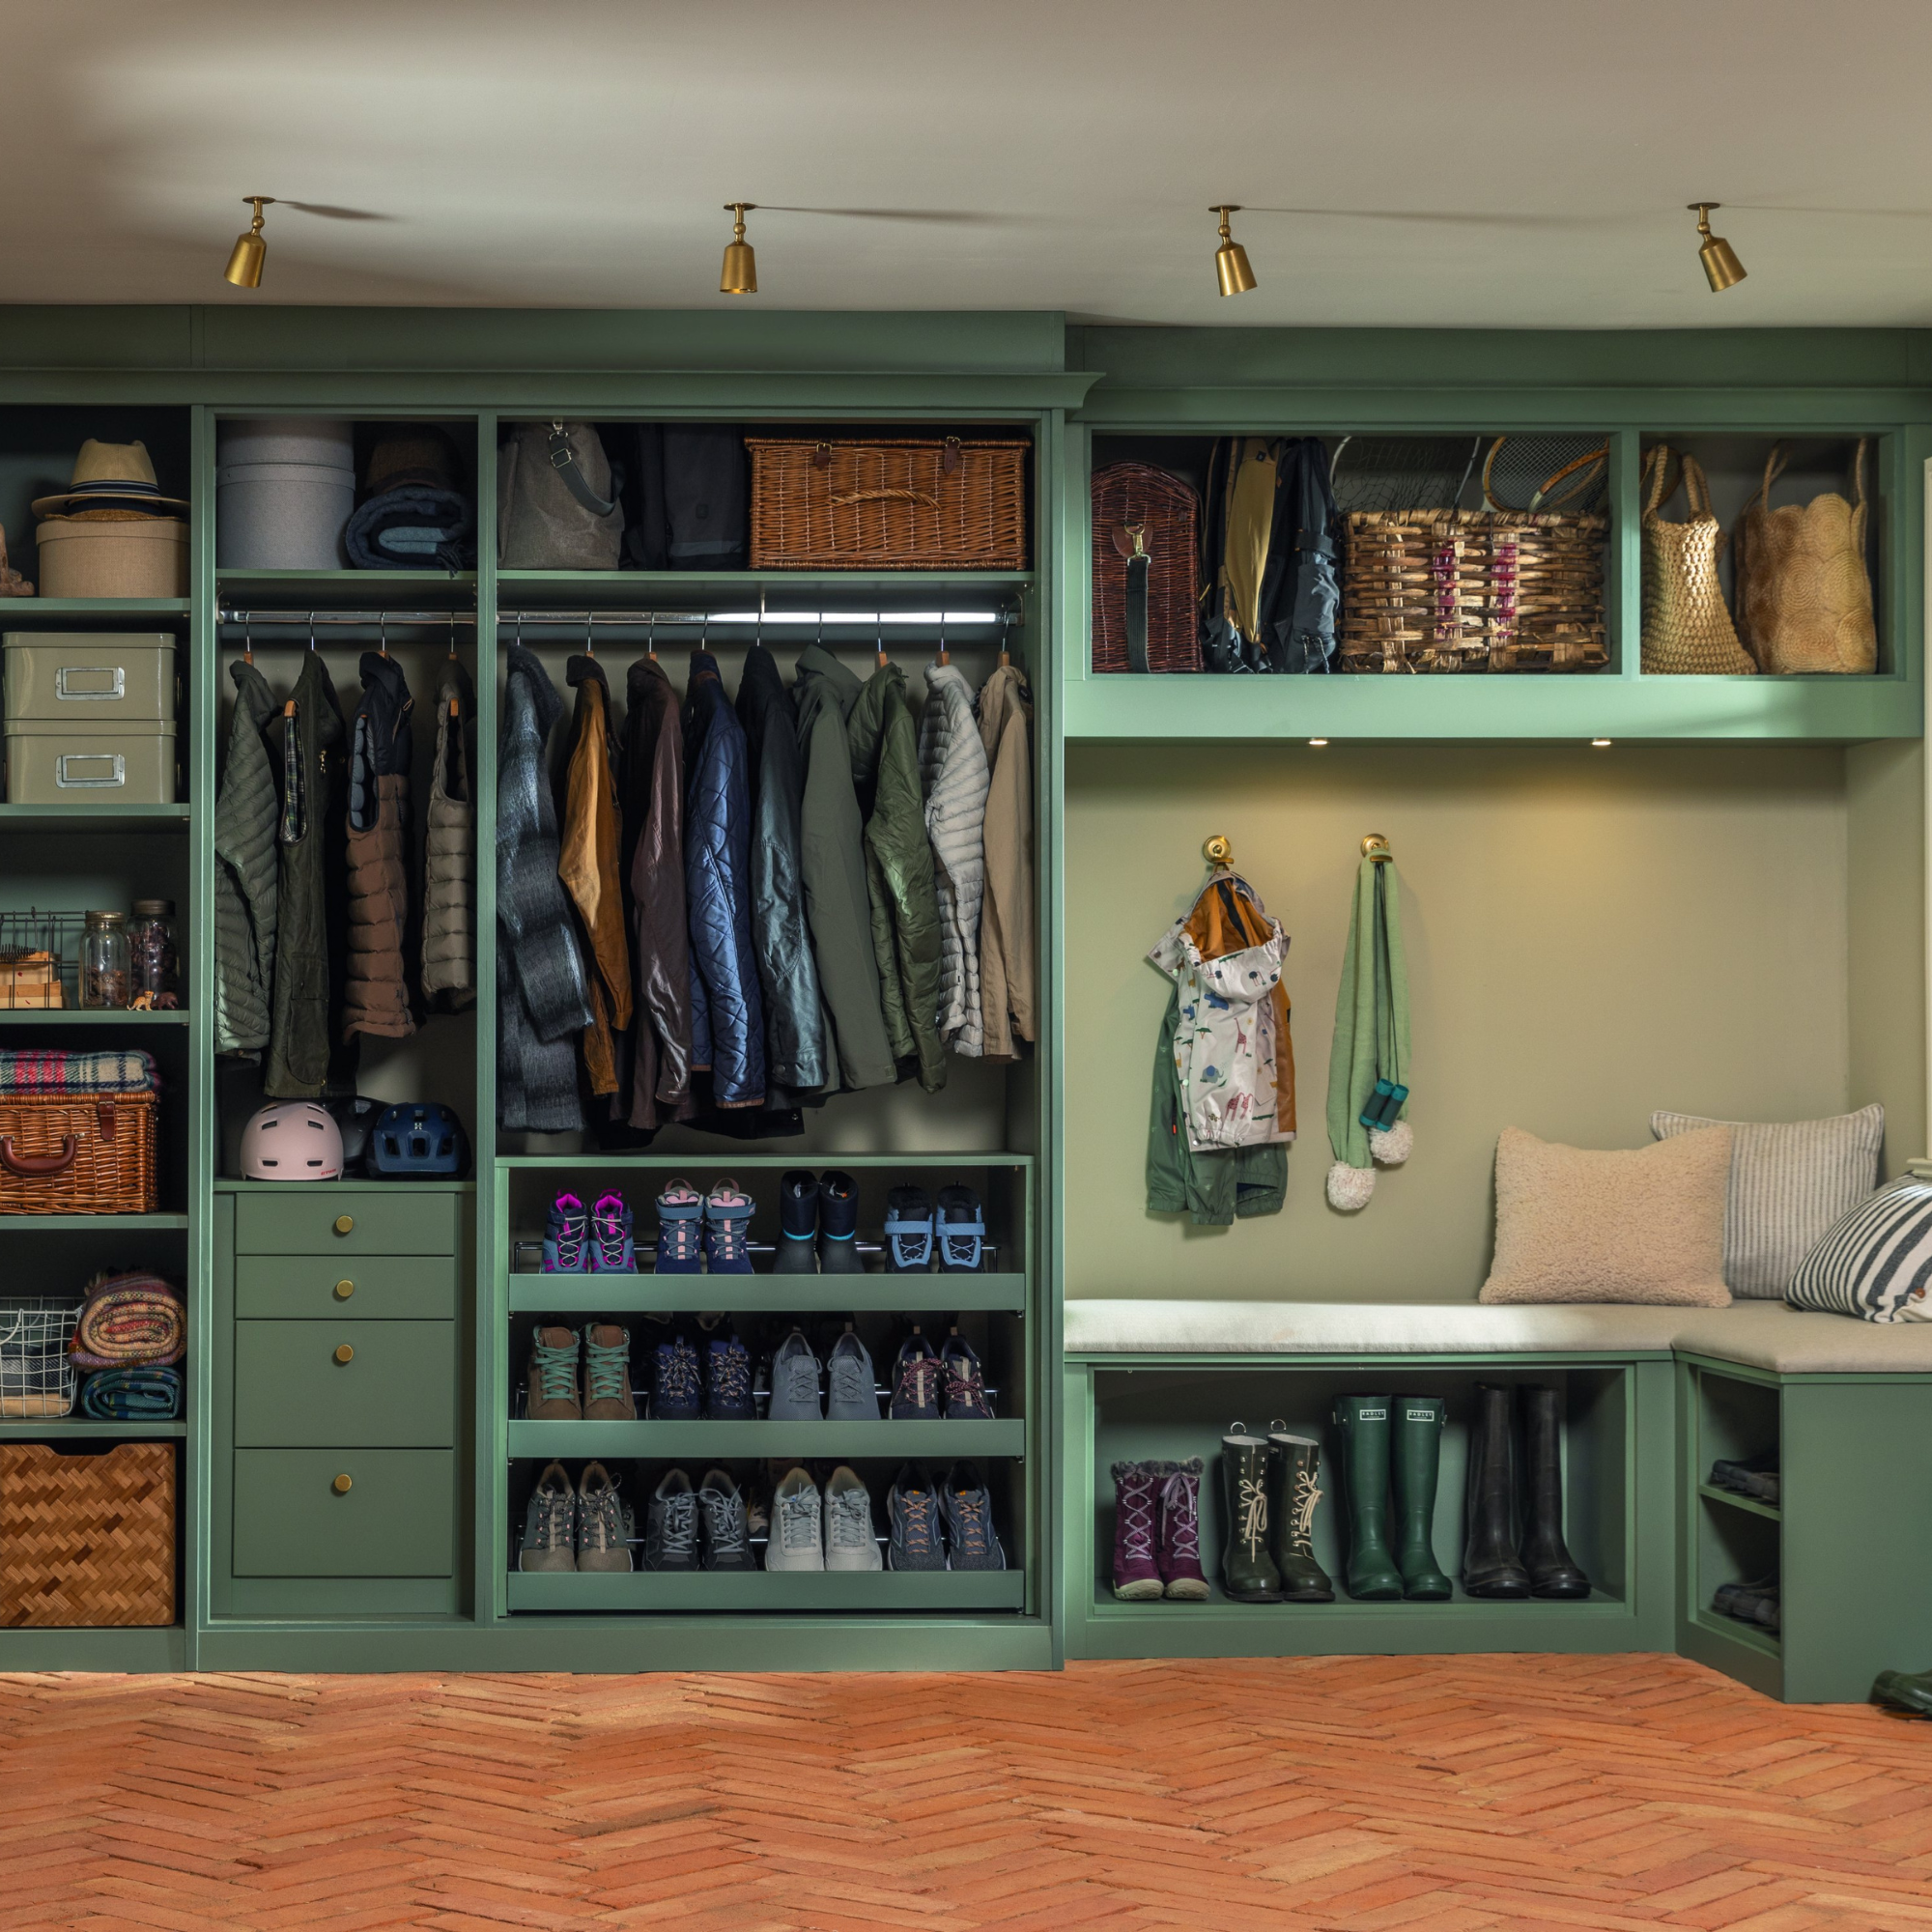 Boot room with built in green storage for coats, shows and drawers